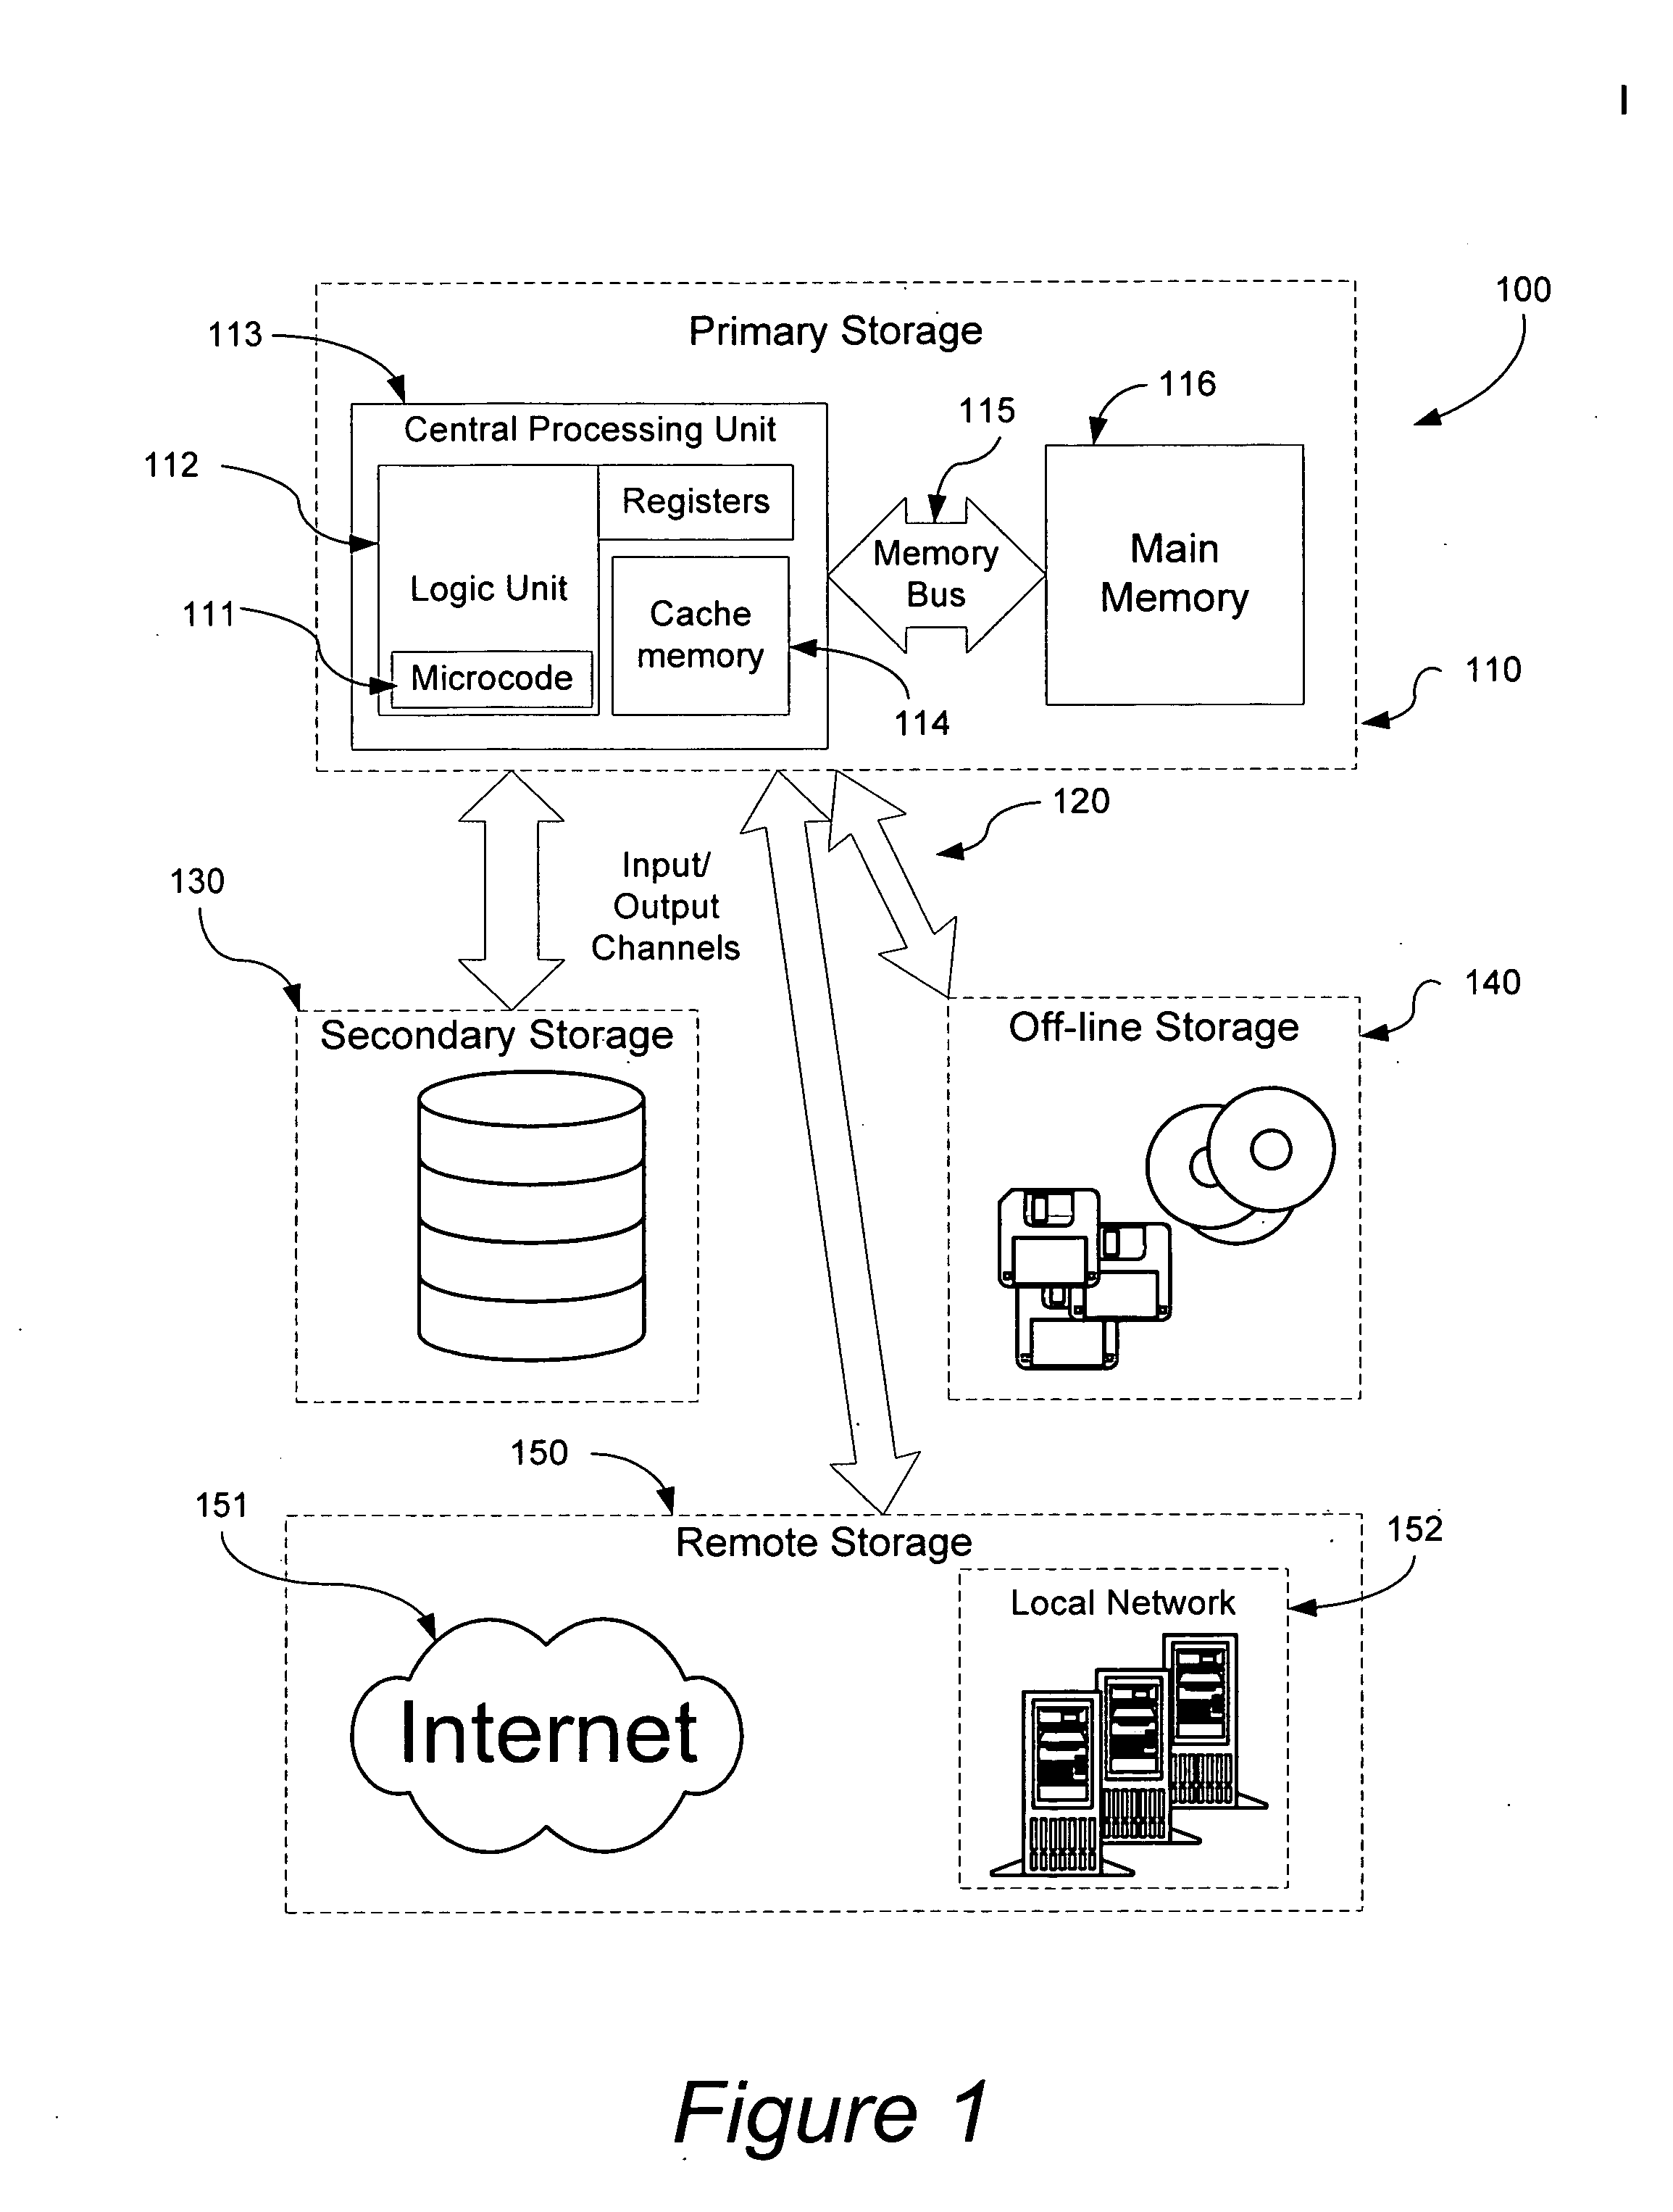 Method and apparatus for protection of a computer system from malicious code attacks